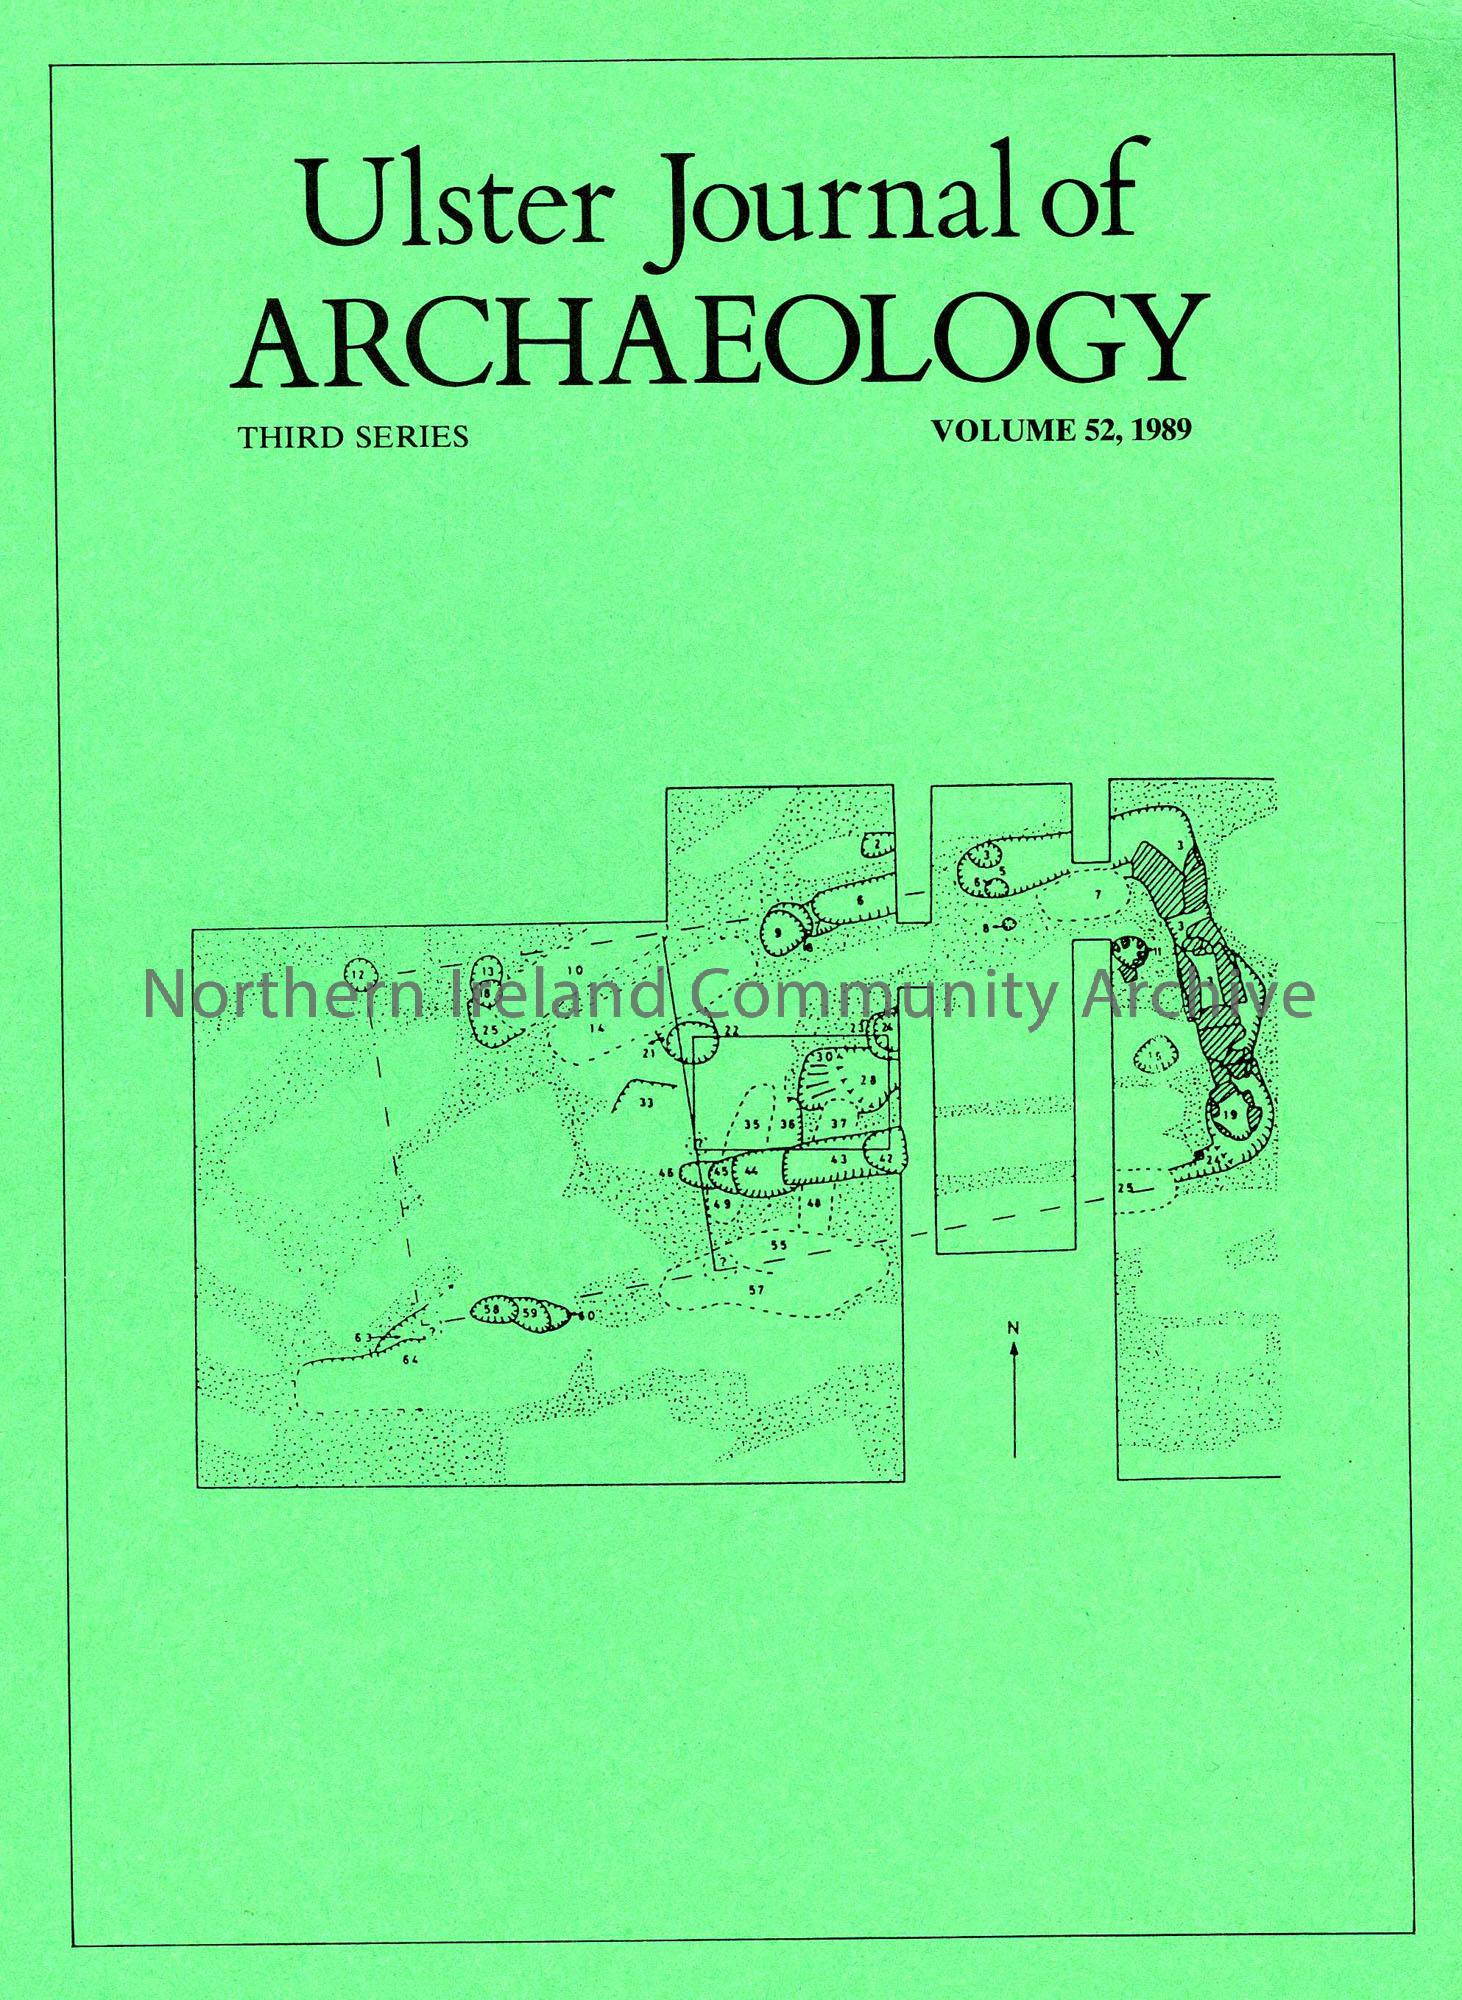 book titled, Ulster Journal of Archaeology. Third Series Volume 52, 1989 (4946)